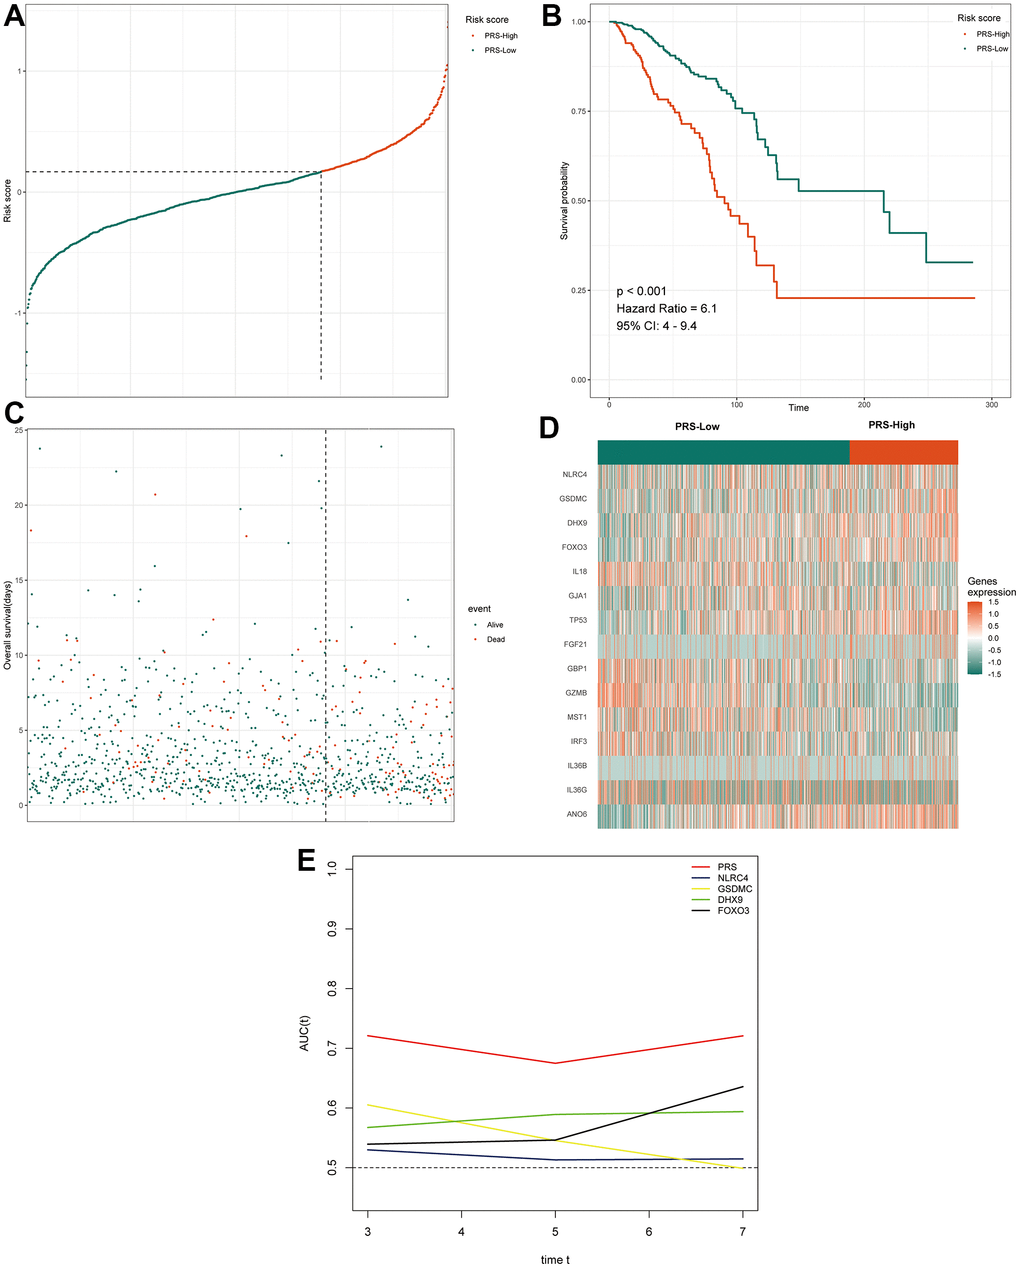 Prognostic analysis of the 15 pyroptosis-related gene signature model in TCGA cohort. (A) The distribution and cutoff value of the risk score in the TCGA cohort. (B) Kaplan–Meier curves for the OS of patients in the two groups in the TCGA cohort. (C) The distributions of OS status, OS and the risk score in the TCGA cohort. (D) Heatmap showing differences in the expression of 15 pyroptosis-related genes between high-PRS group and low-PRS group. (E) tROC analysis showed that the PRS was an accurate variable for survival prediction. The four genes shown in the figure have the four highest AUCs among the 15 signature genes. TCGA, The Cancer Genome Atlas; PRS, pyroptosis-related risk score; High-PRS, high pyroptosis-related risk score; Low-PRS, low pyroptosis-related risk score; OS, overall survival; tROC, time-dependent receiver operating characteristic; AUC, area under the curve.